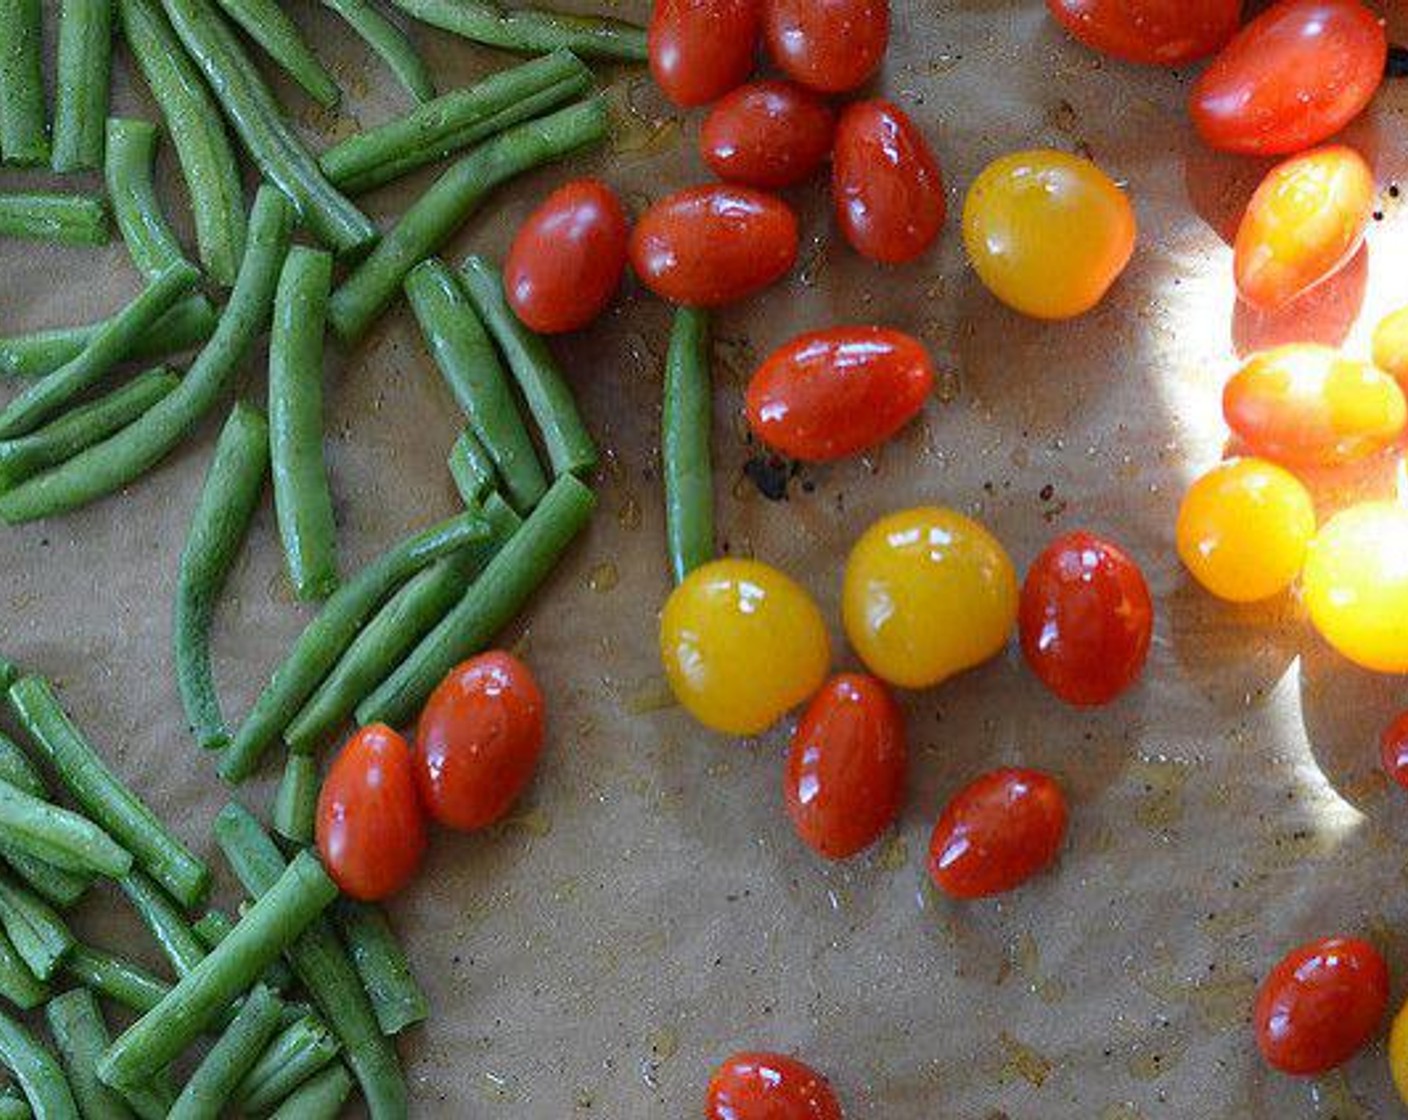 step 2 Evenly spread out Green Beans (2 cups) and Cherry Tomatoes (2 cups) on a baking sheet. Drizzle with Olive Oil (1 Tbsp) and toss to coat vegetables. Sprinkle with Salt (to taste) and Ground Black Pepper (to taste).